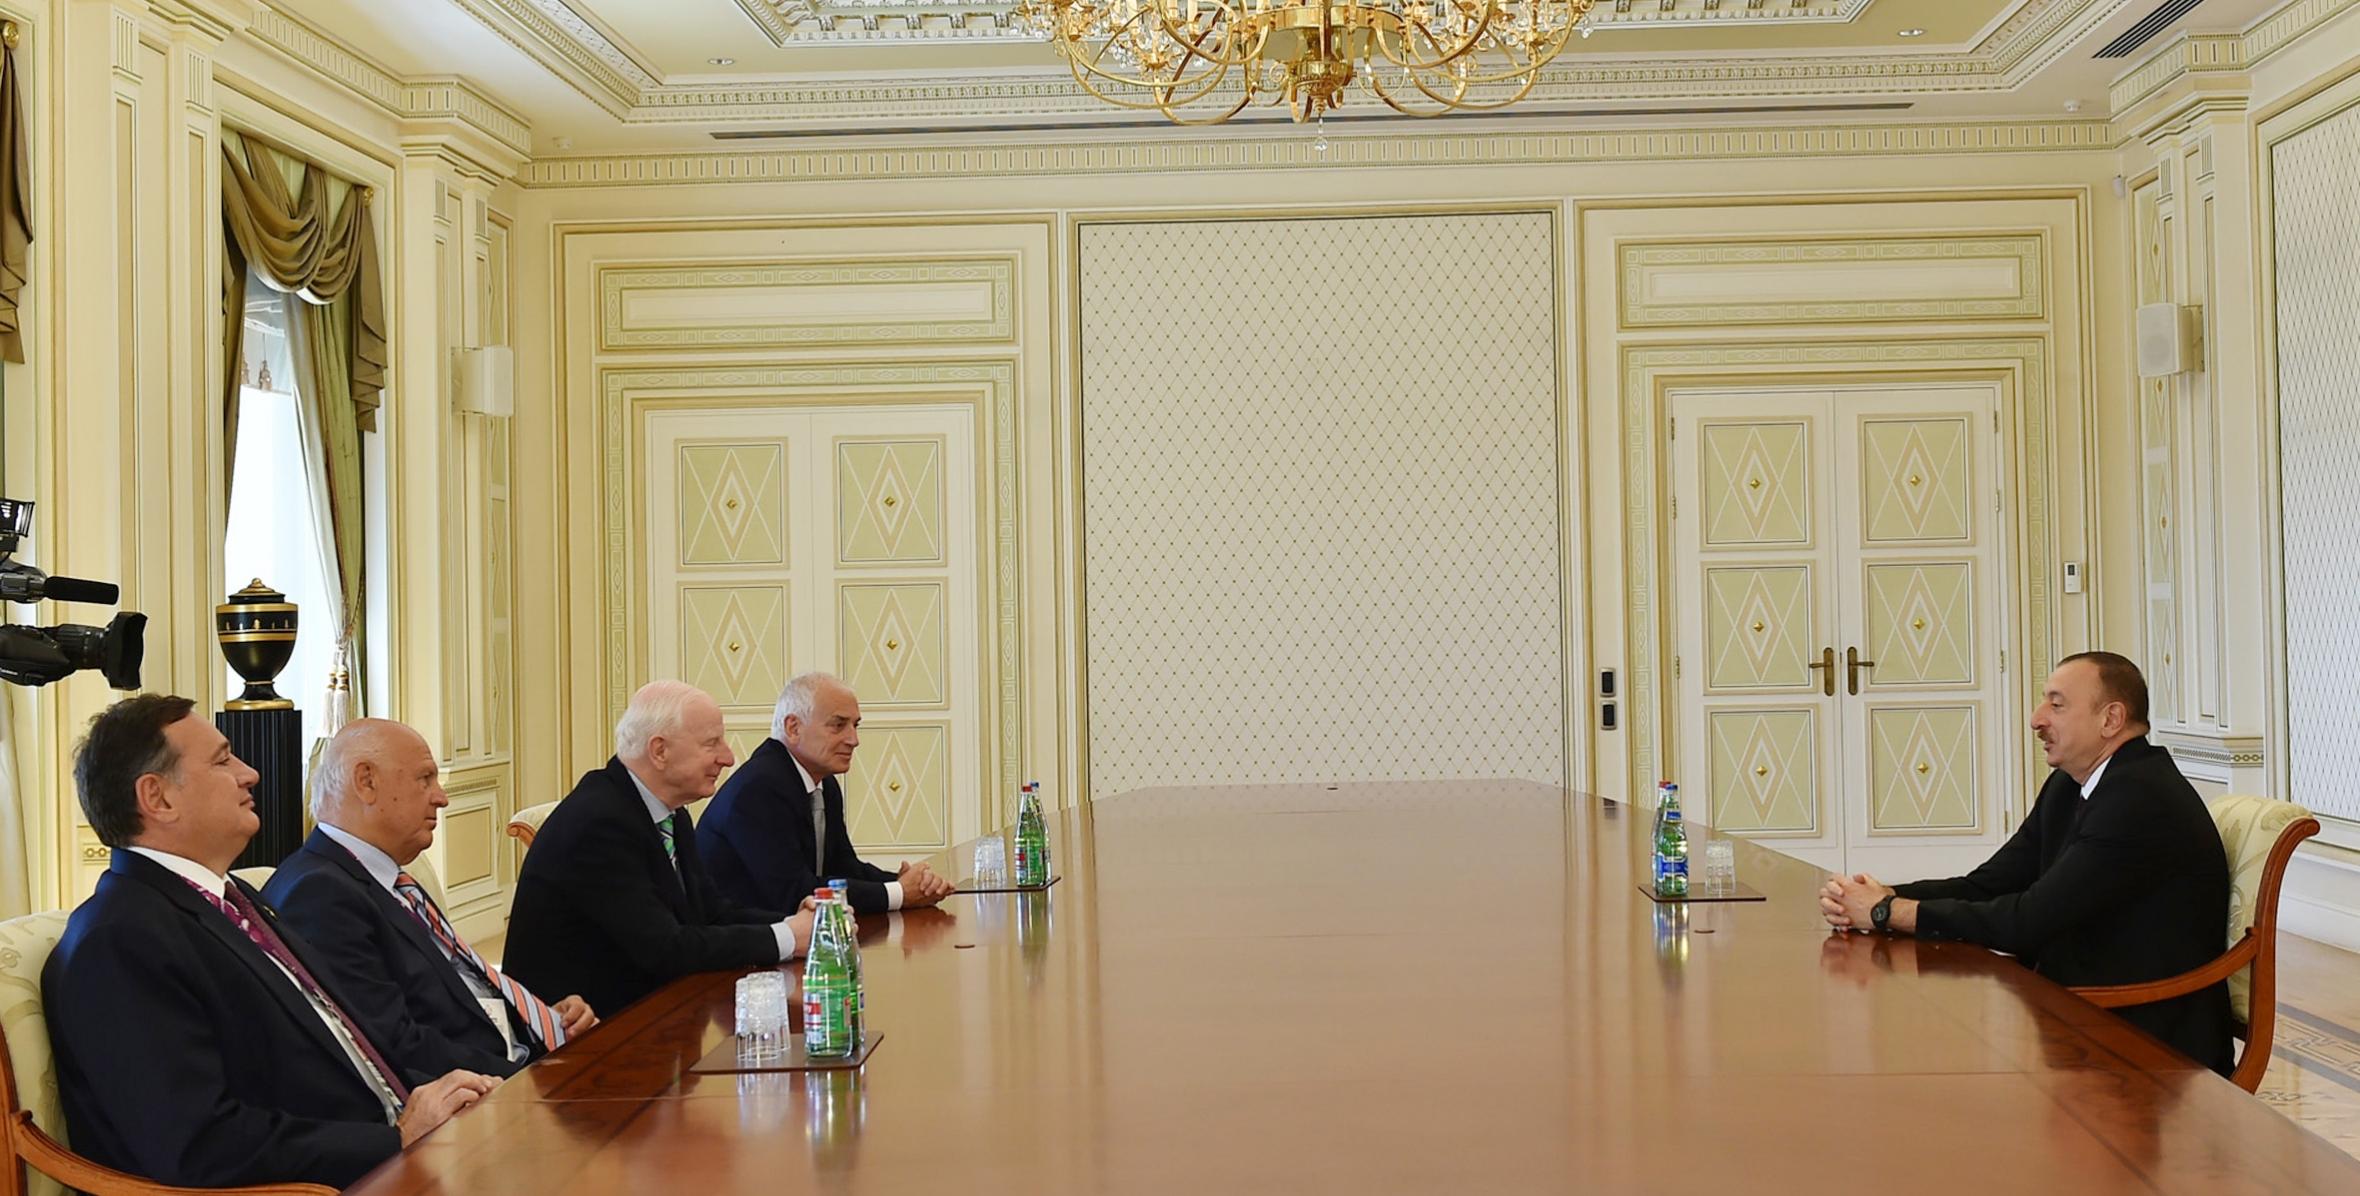 Ilham Aliyev received a delegation led by the president of the European Olympic Committees